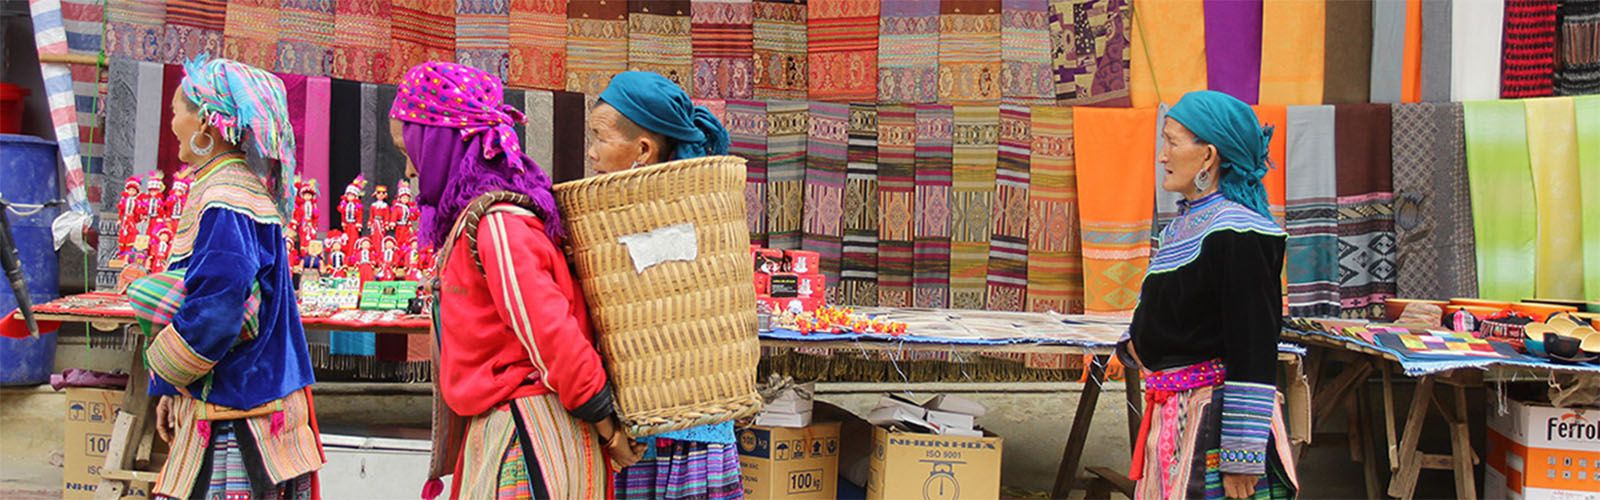 Most Colorful Week-end Market Around Sapa  | Blogs | Asianventure Tours